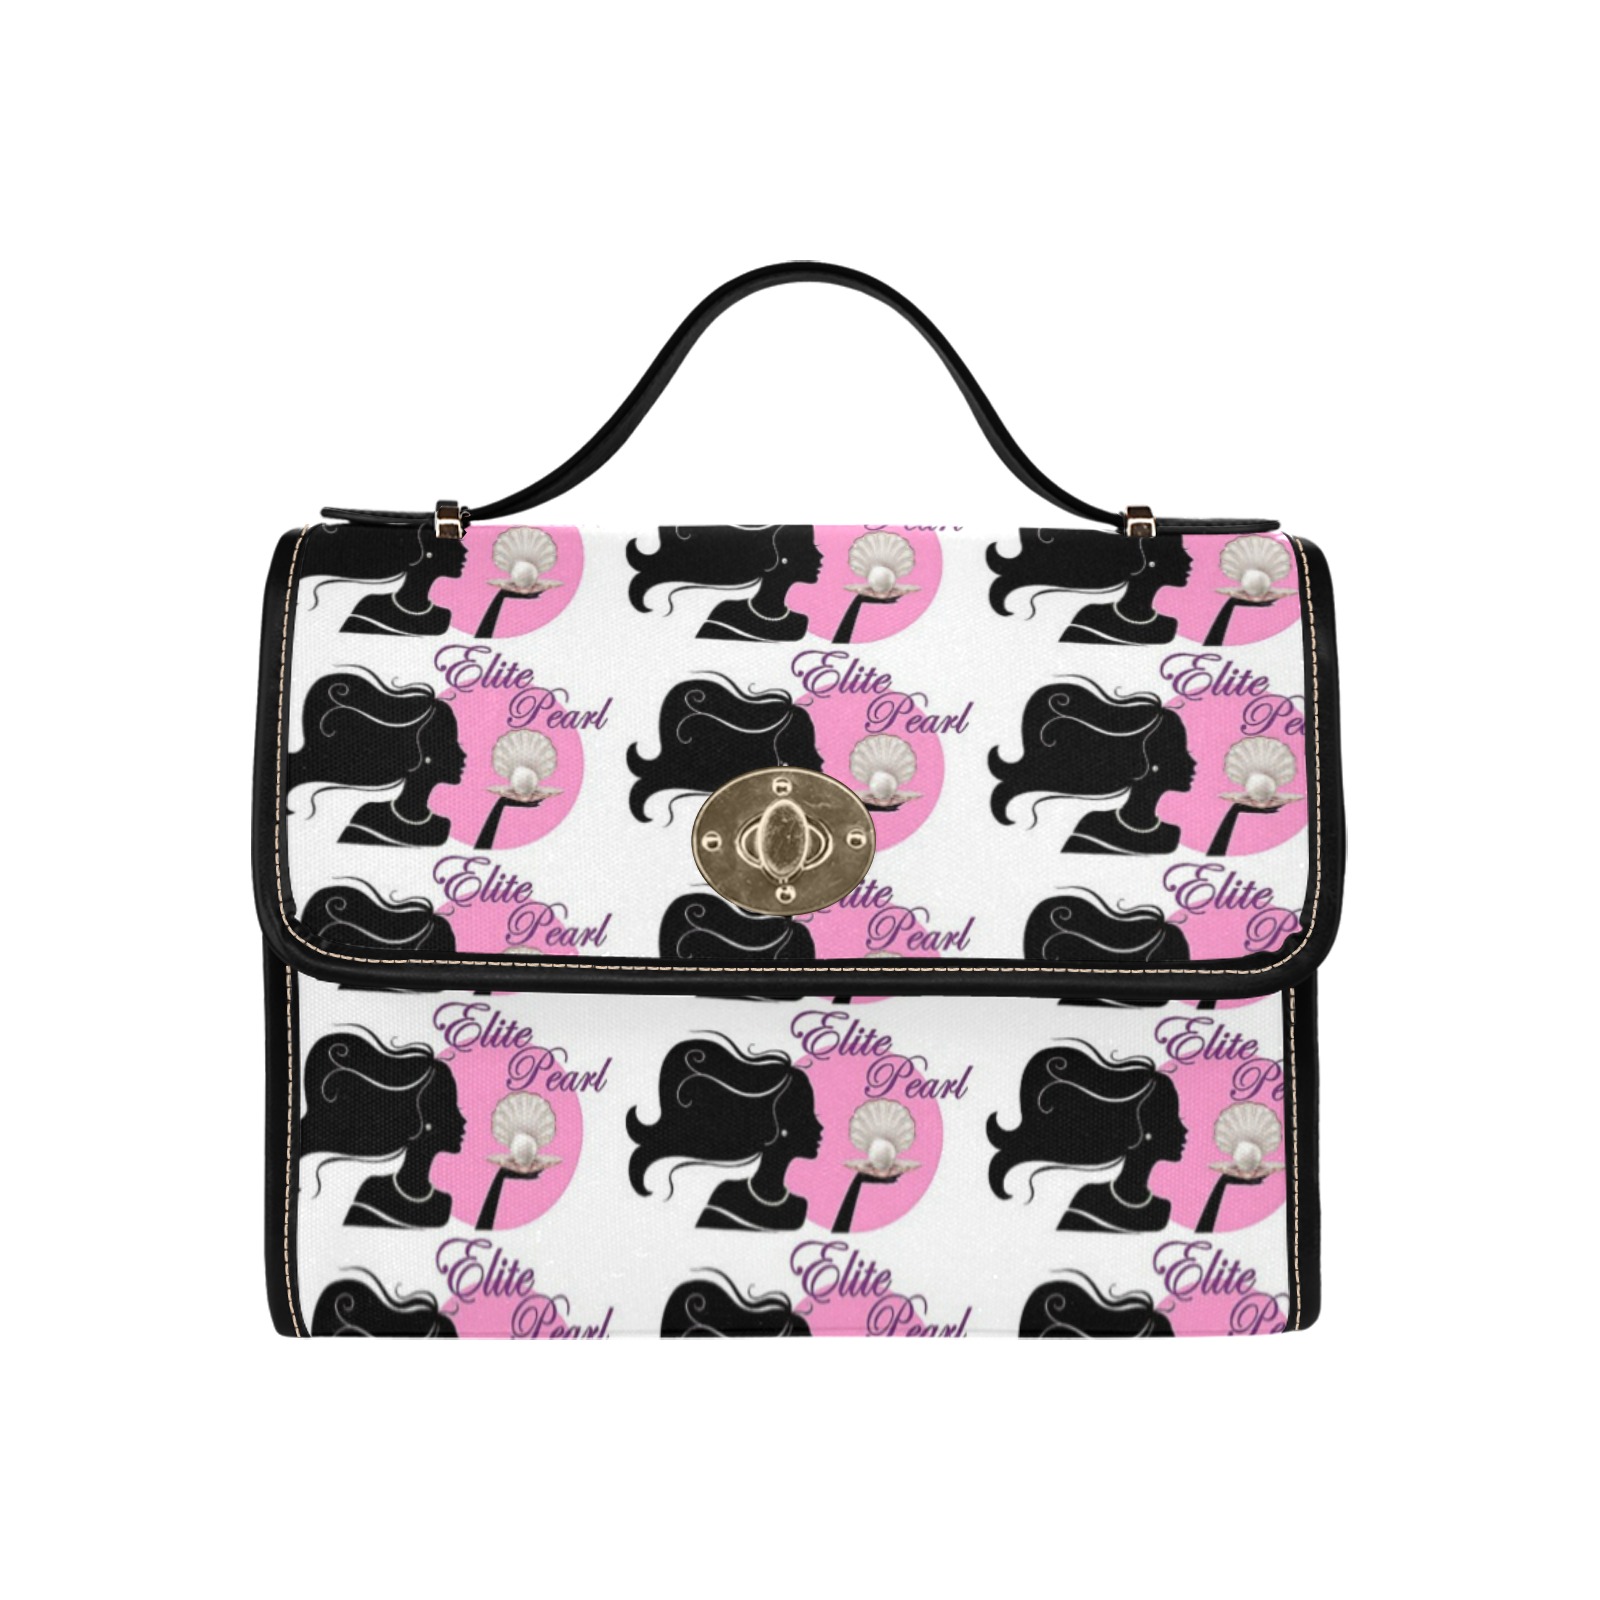 Patterned women's handbag with silhouette design.